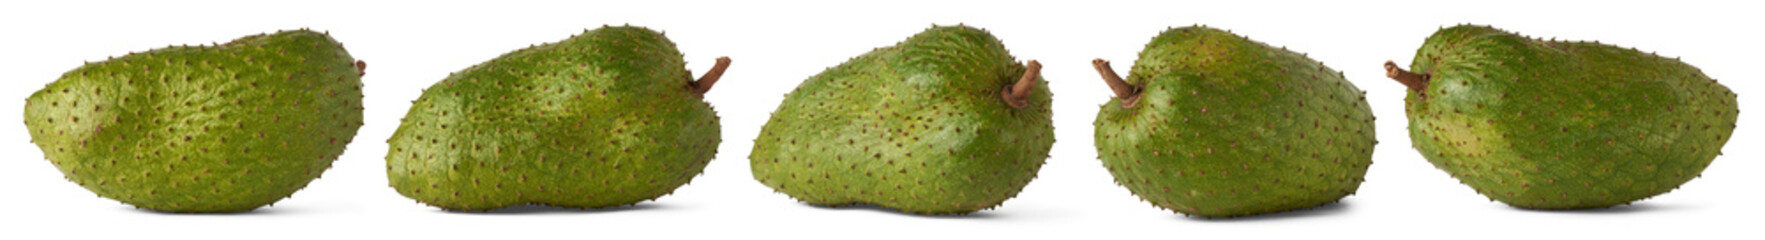 cherimoya, annona muricata, irregular and oblong shaped large edible fruit also known as custard apple or soursop, sweet taste tropical fruit on white background, collection